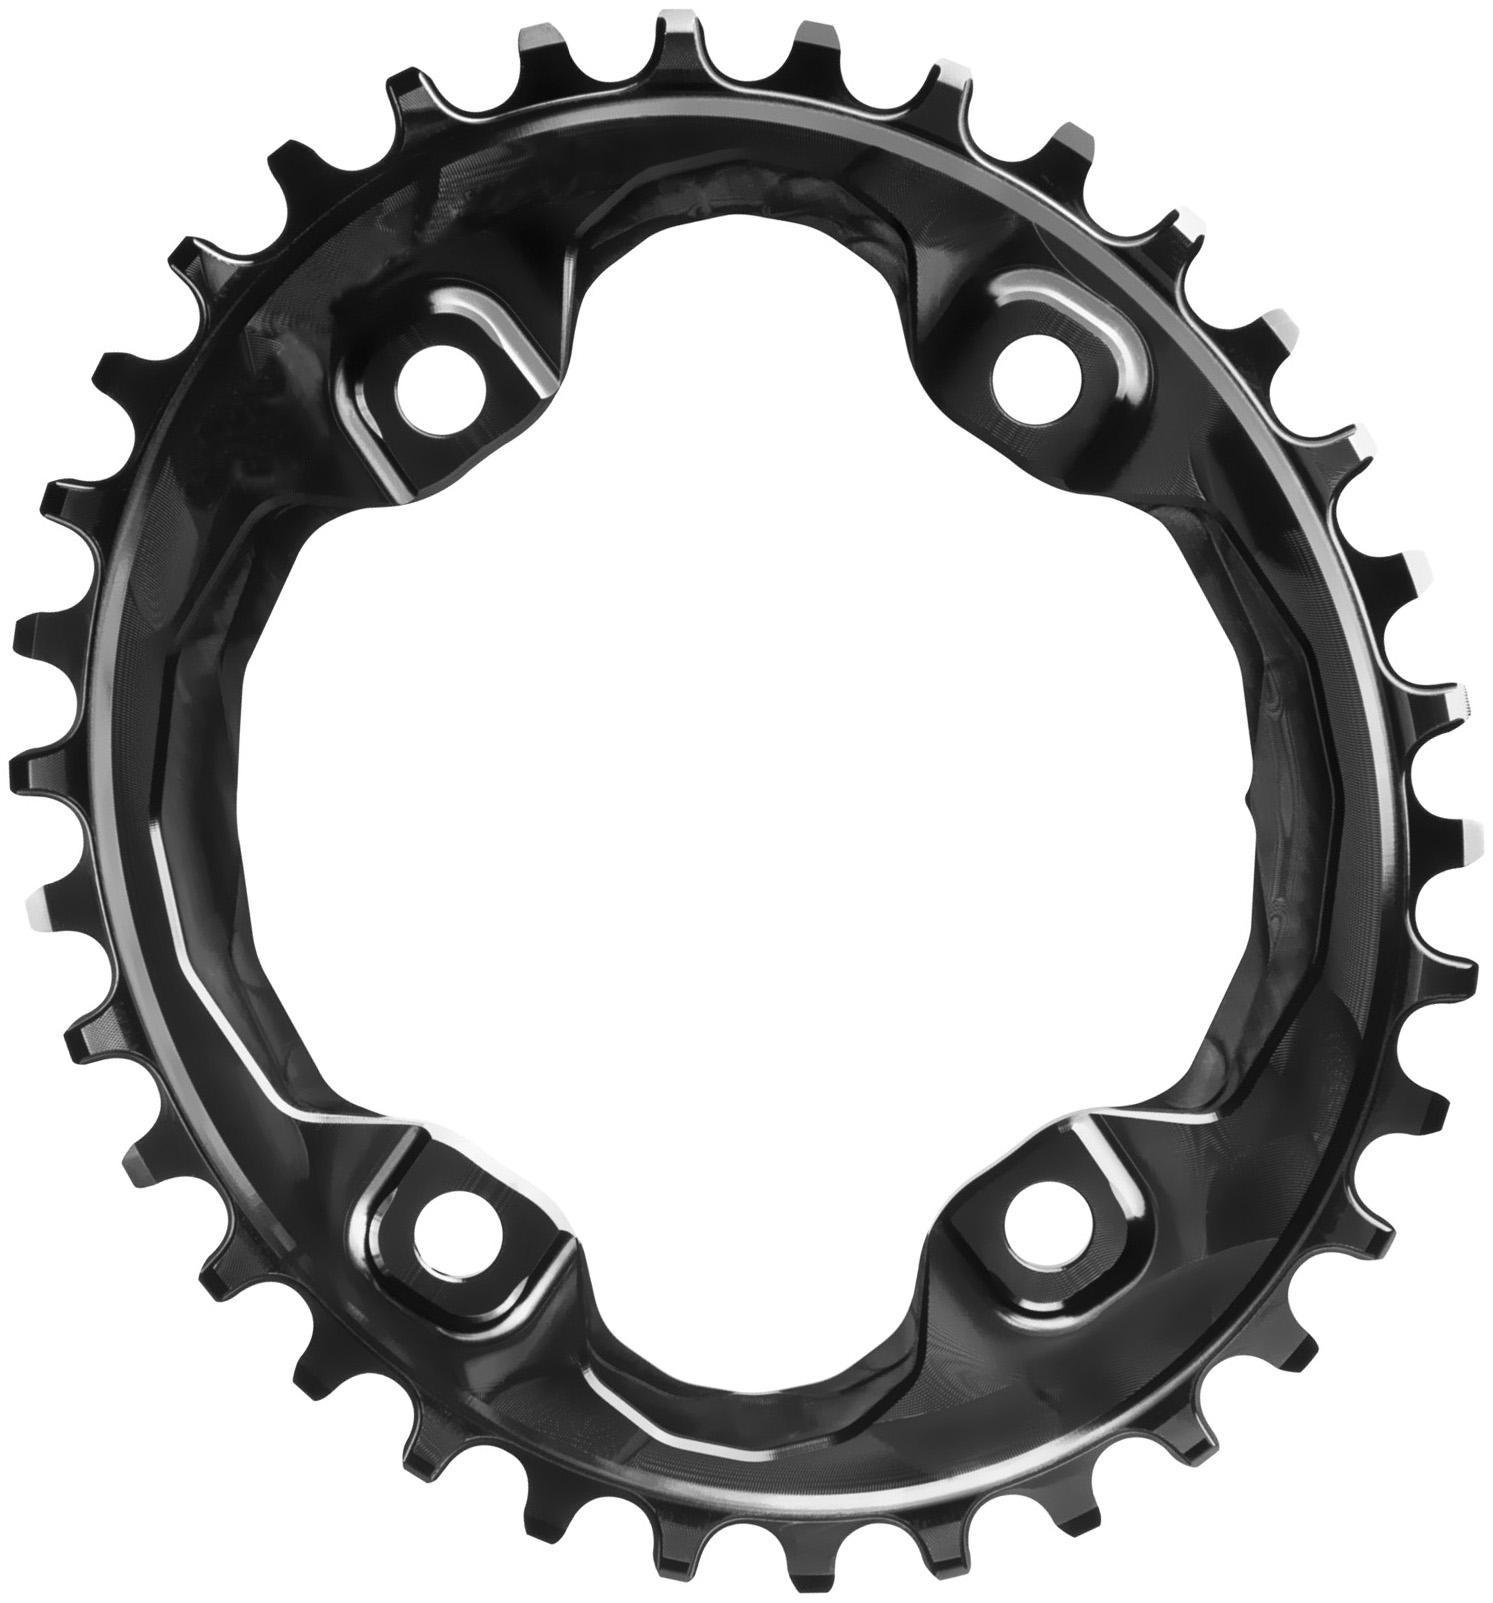 BLACK by Absoluteblack Narrow Wide Oval XT M8000 Chainring | chain ring